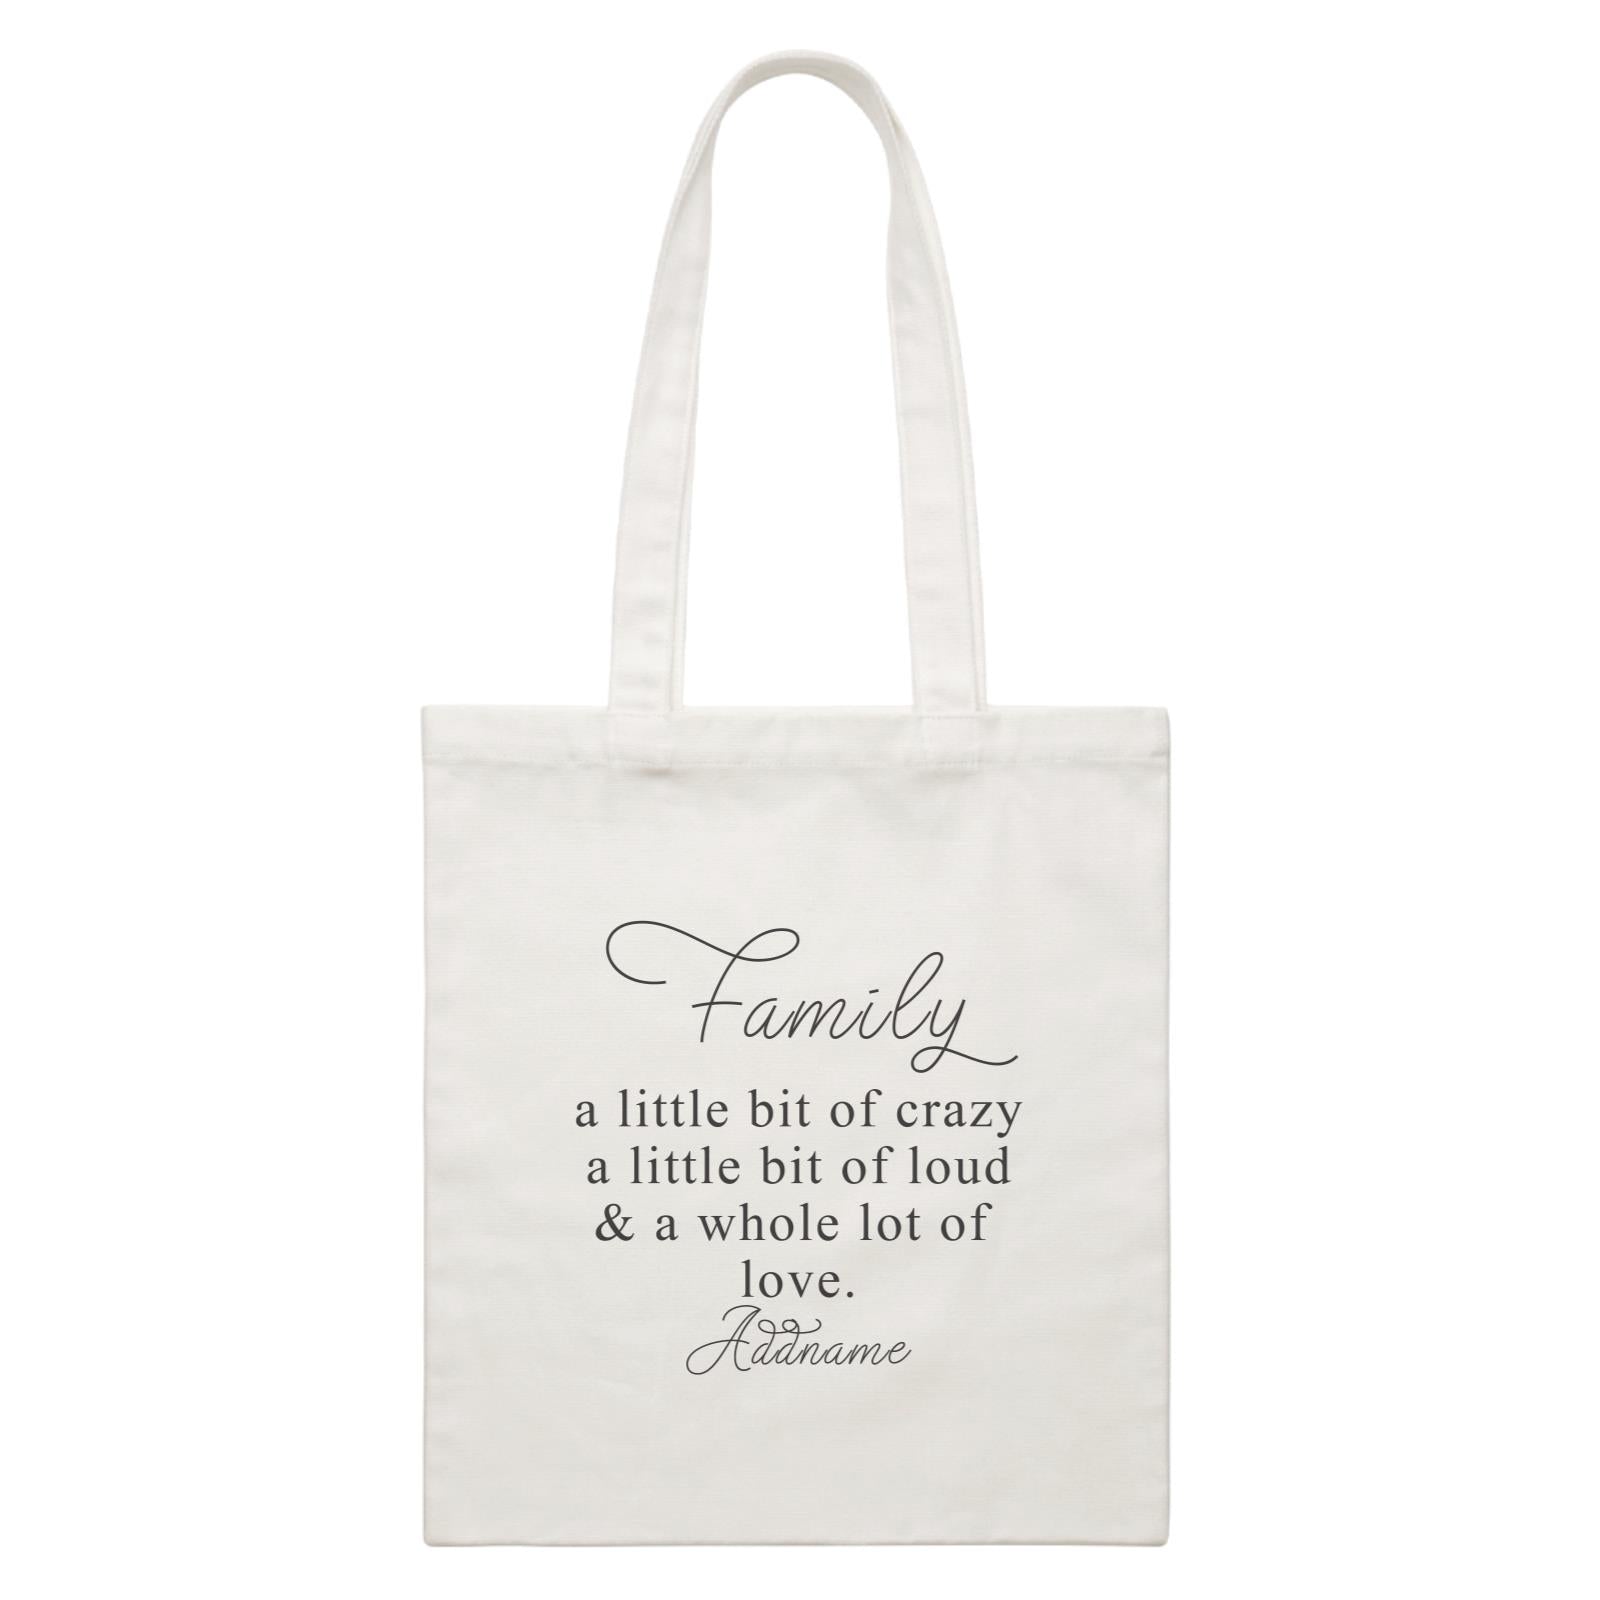 Family Is Everythings Quotes Family A Whole Lot Of Love Addname White Canvas Bag